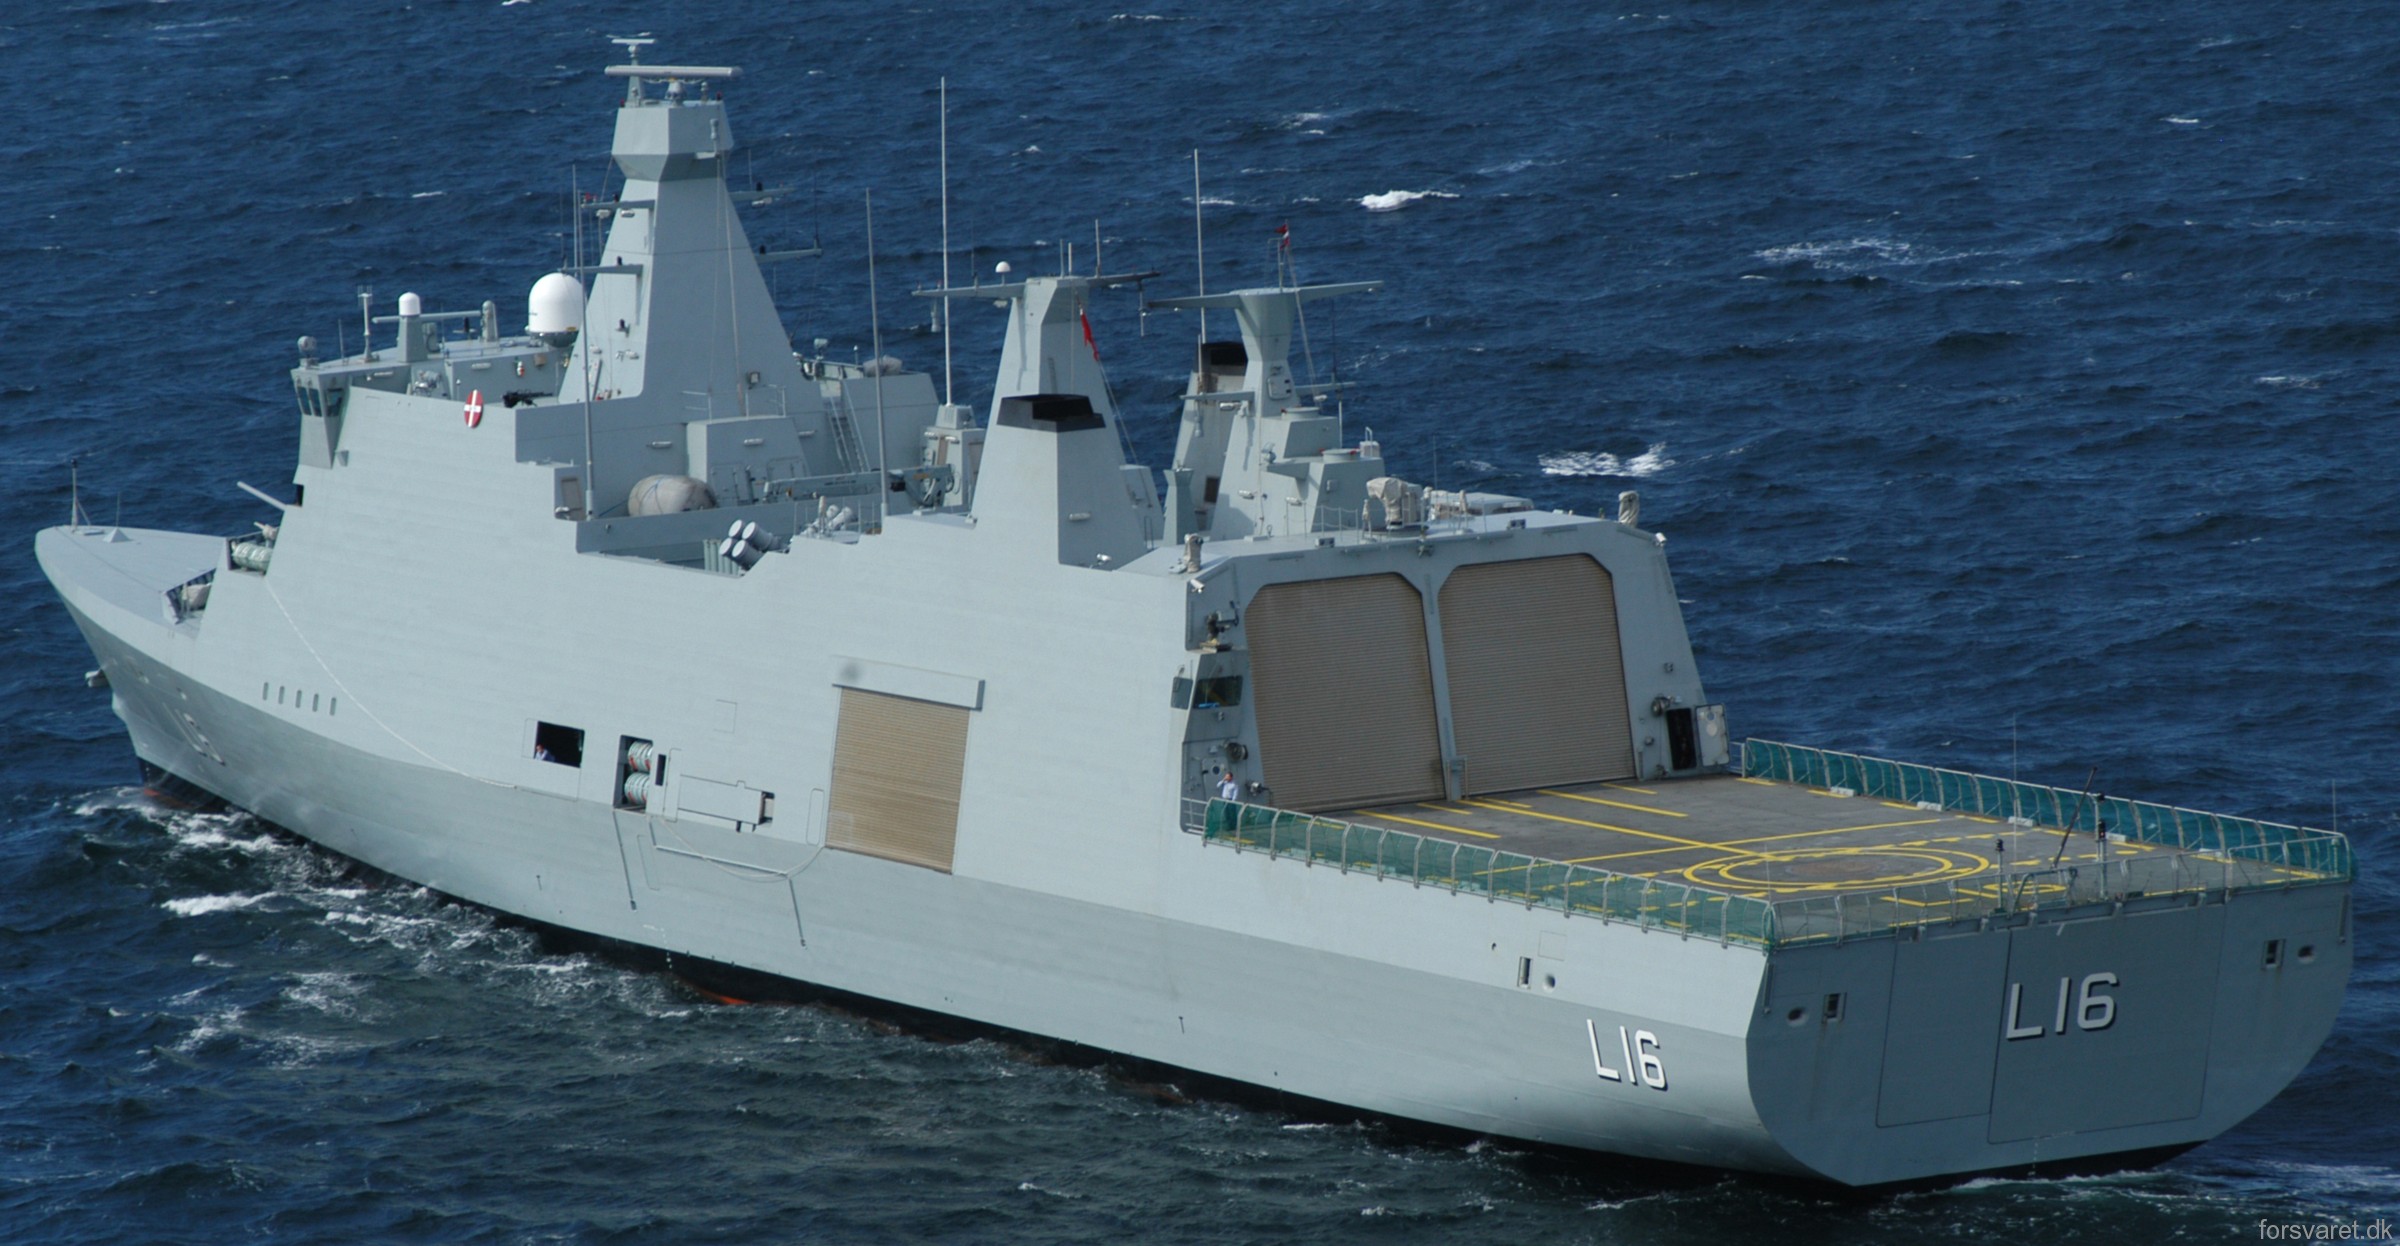 l-16 hdms absalon command support ship frigate royal danish navy 80